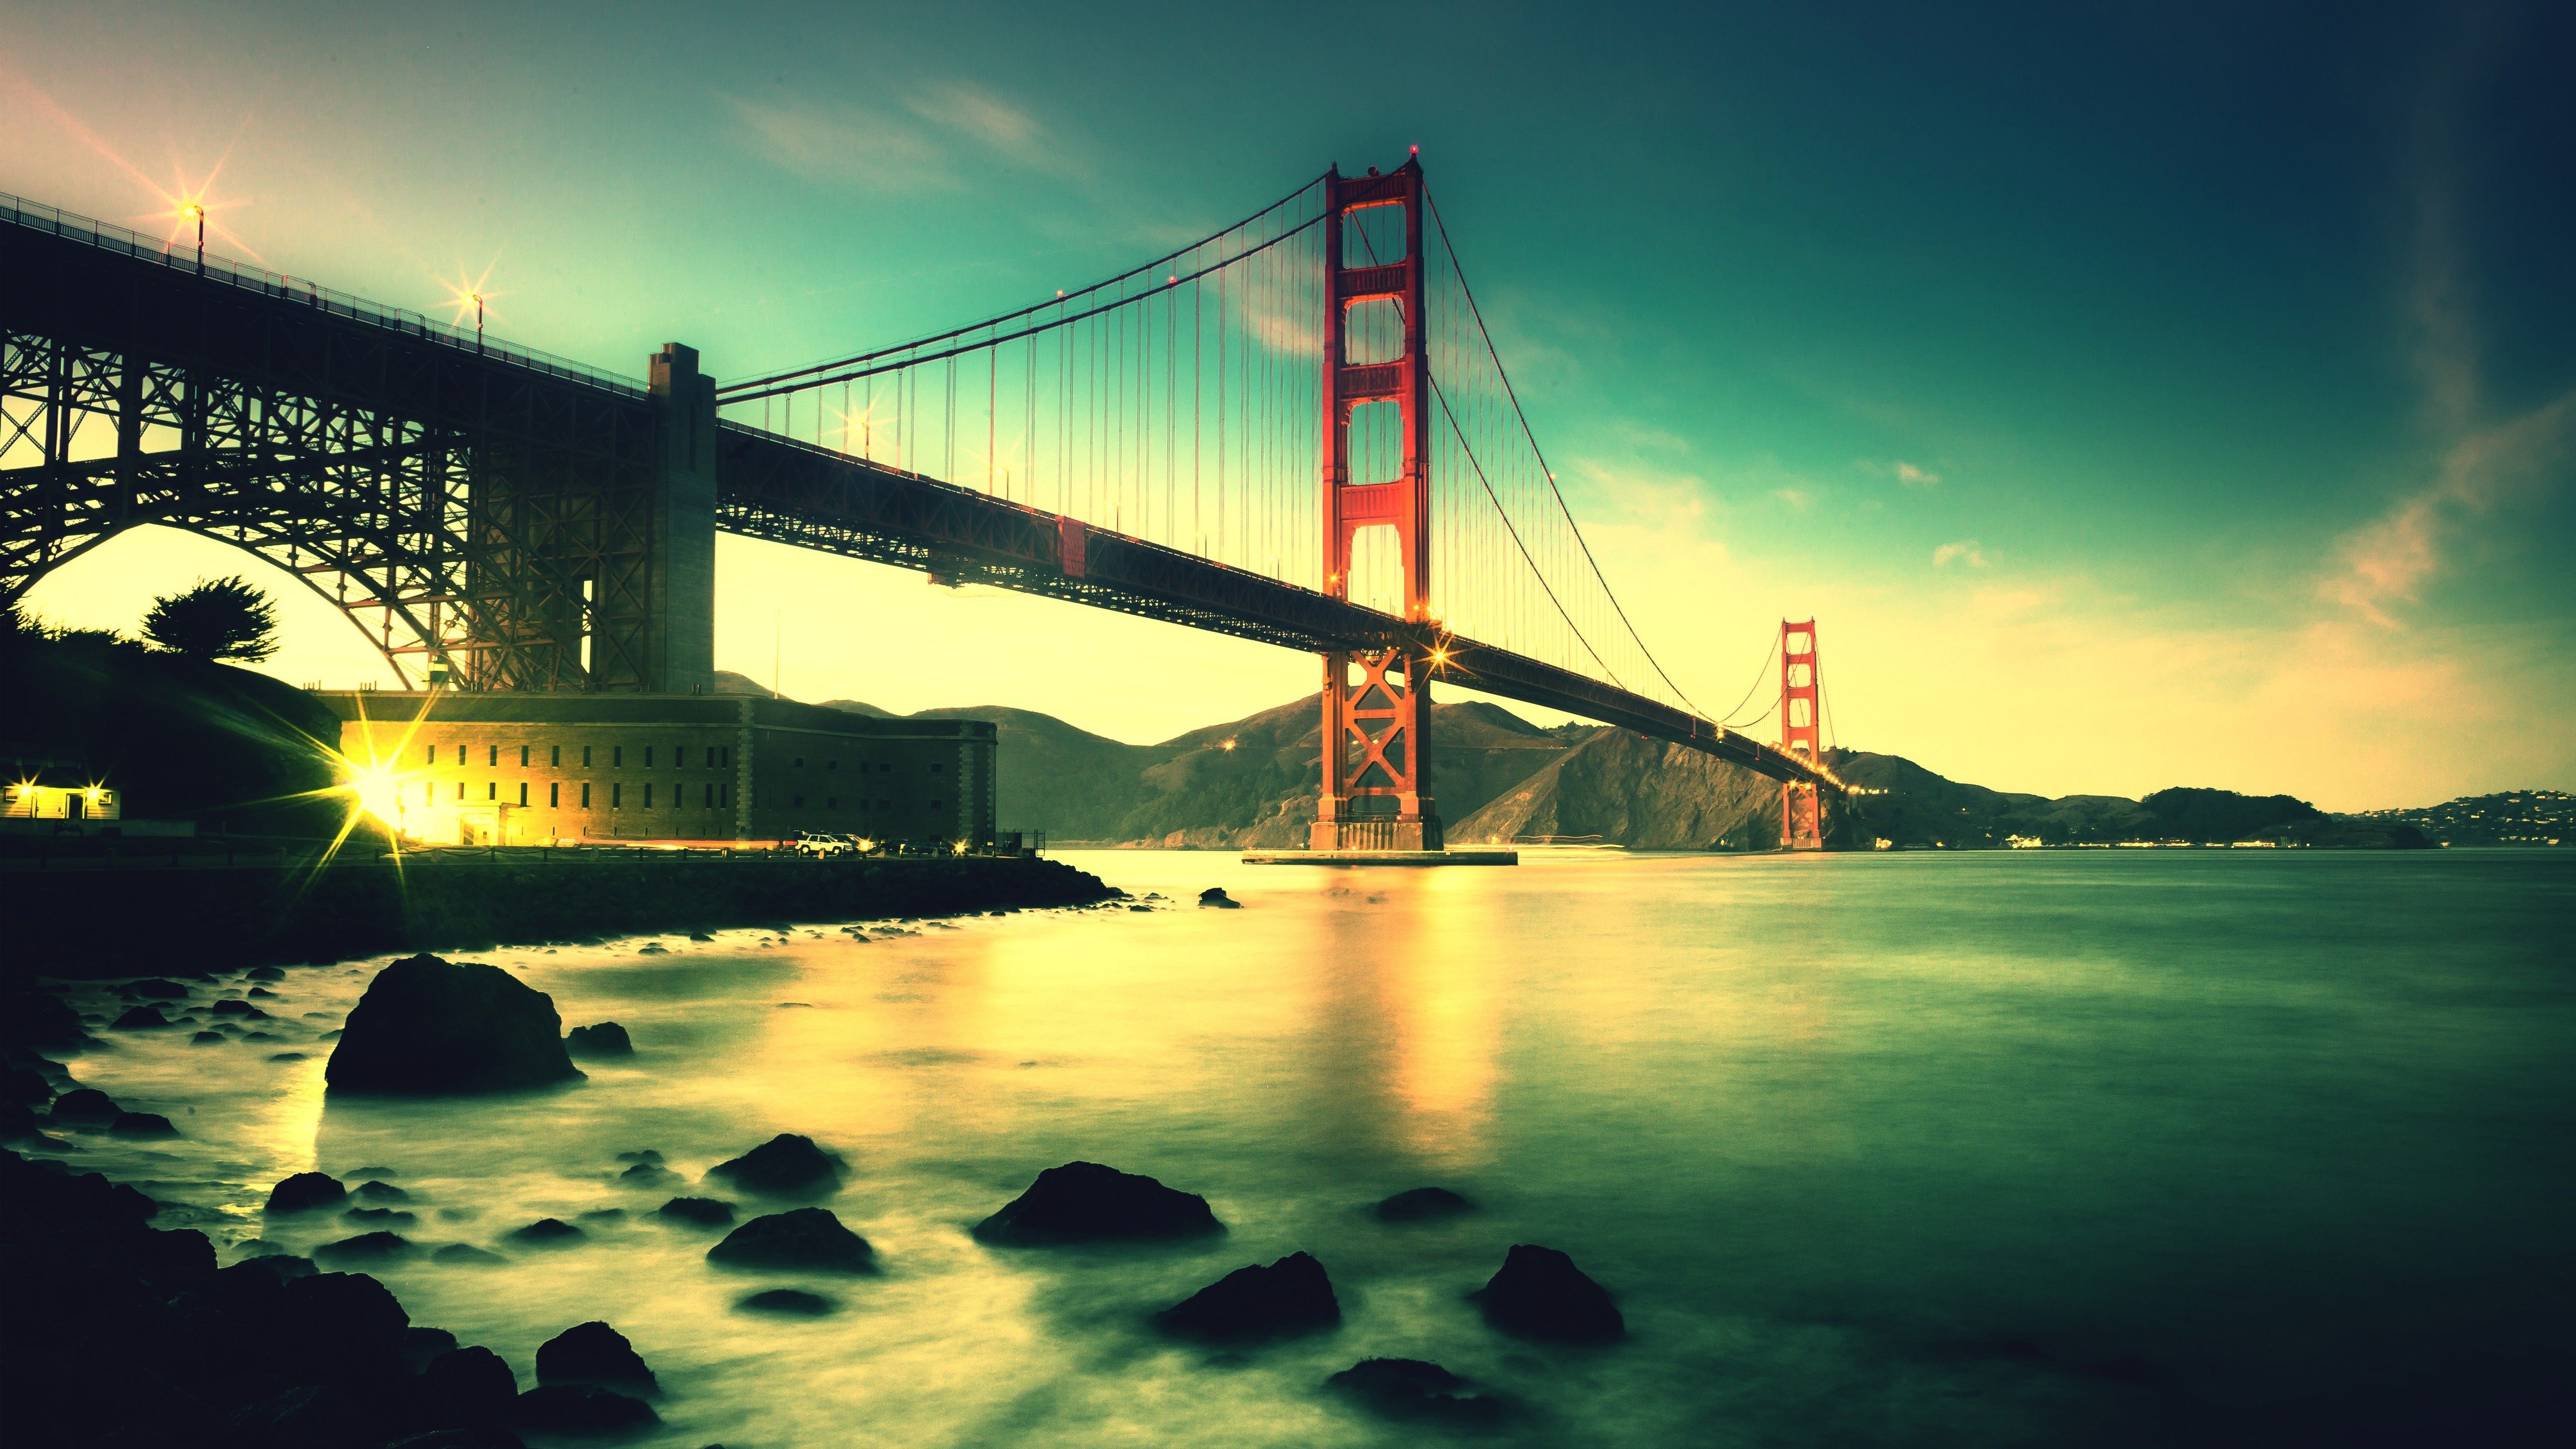 Evening Golden Gate Bridge in San Francisco wallpaper and image, picture, photo